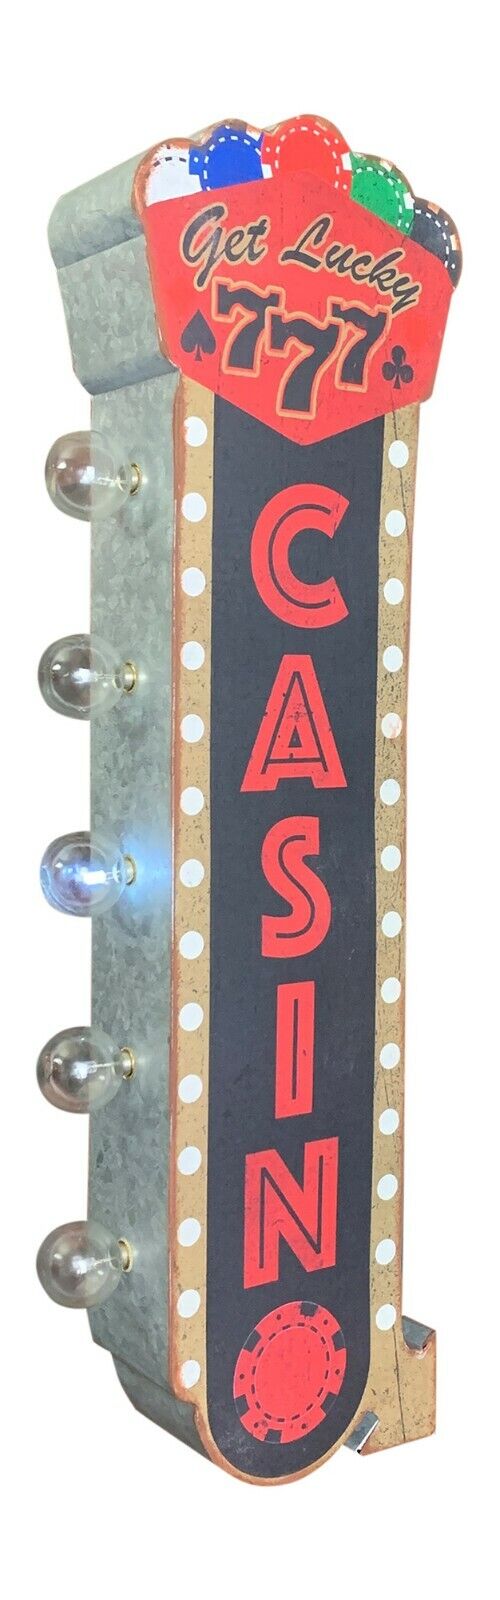 Casino Vintage Style Sign, LED Marquee Flashing Bulbs, Vegas, Game Room Sign